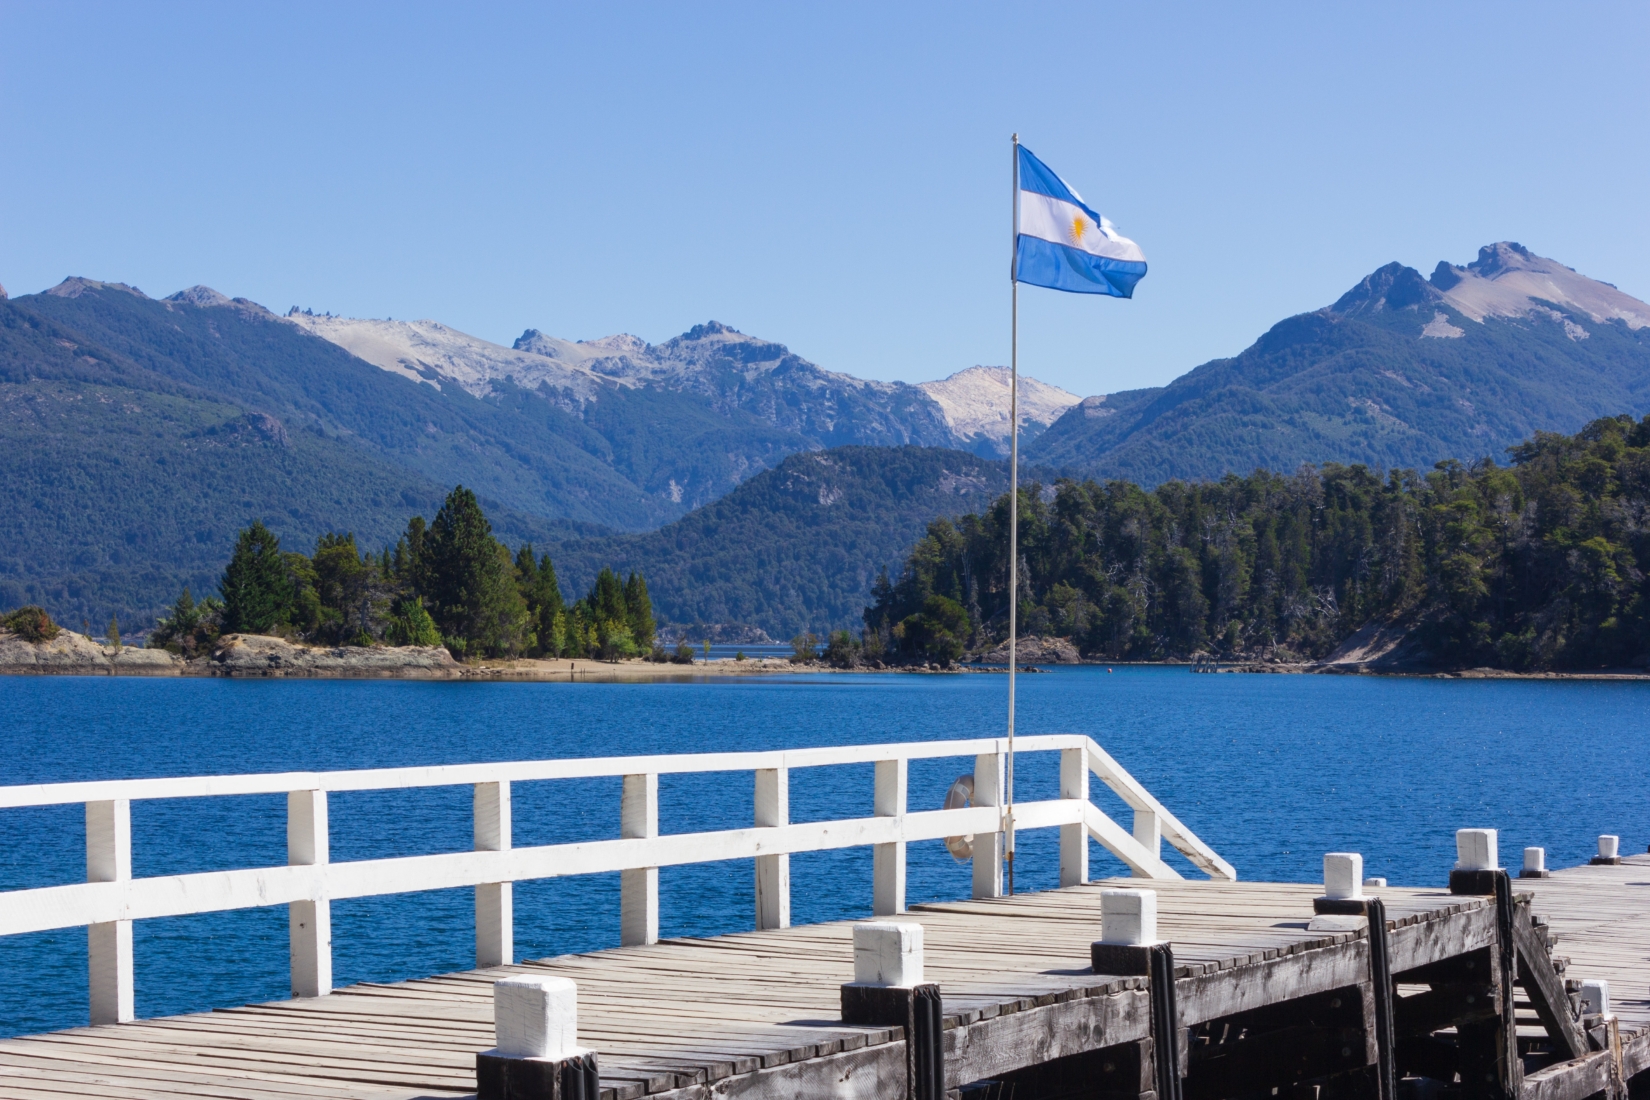 Argentinian flag waving over a dock on a lake with mountains in background